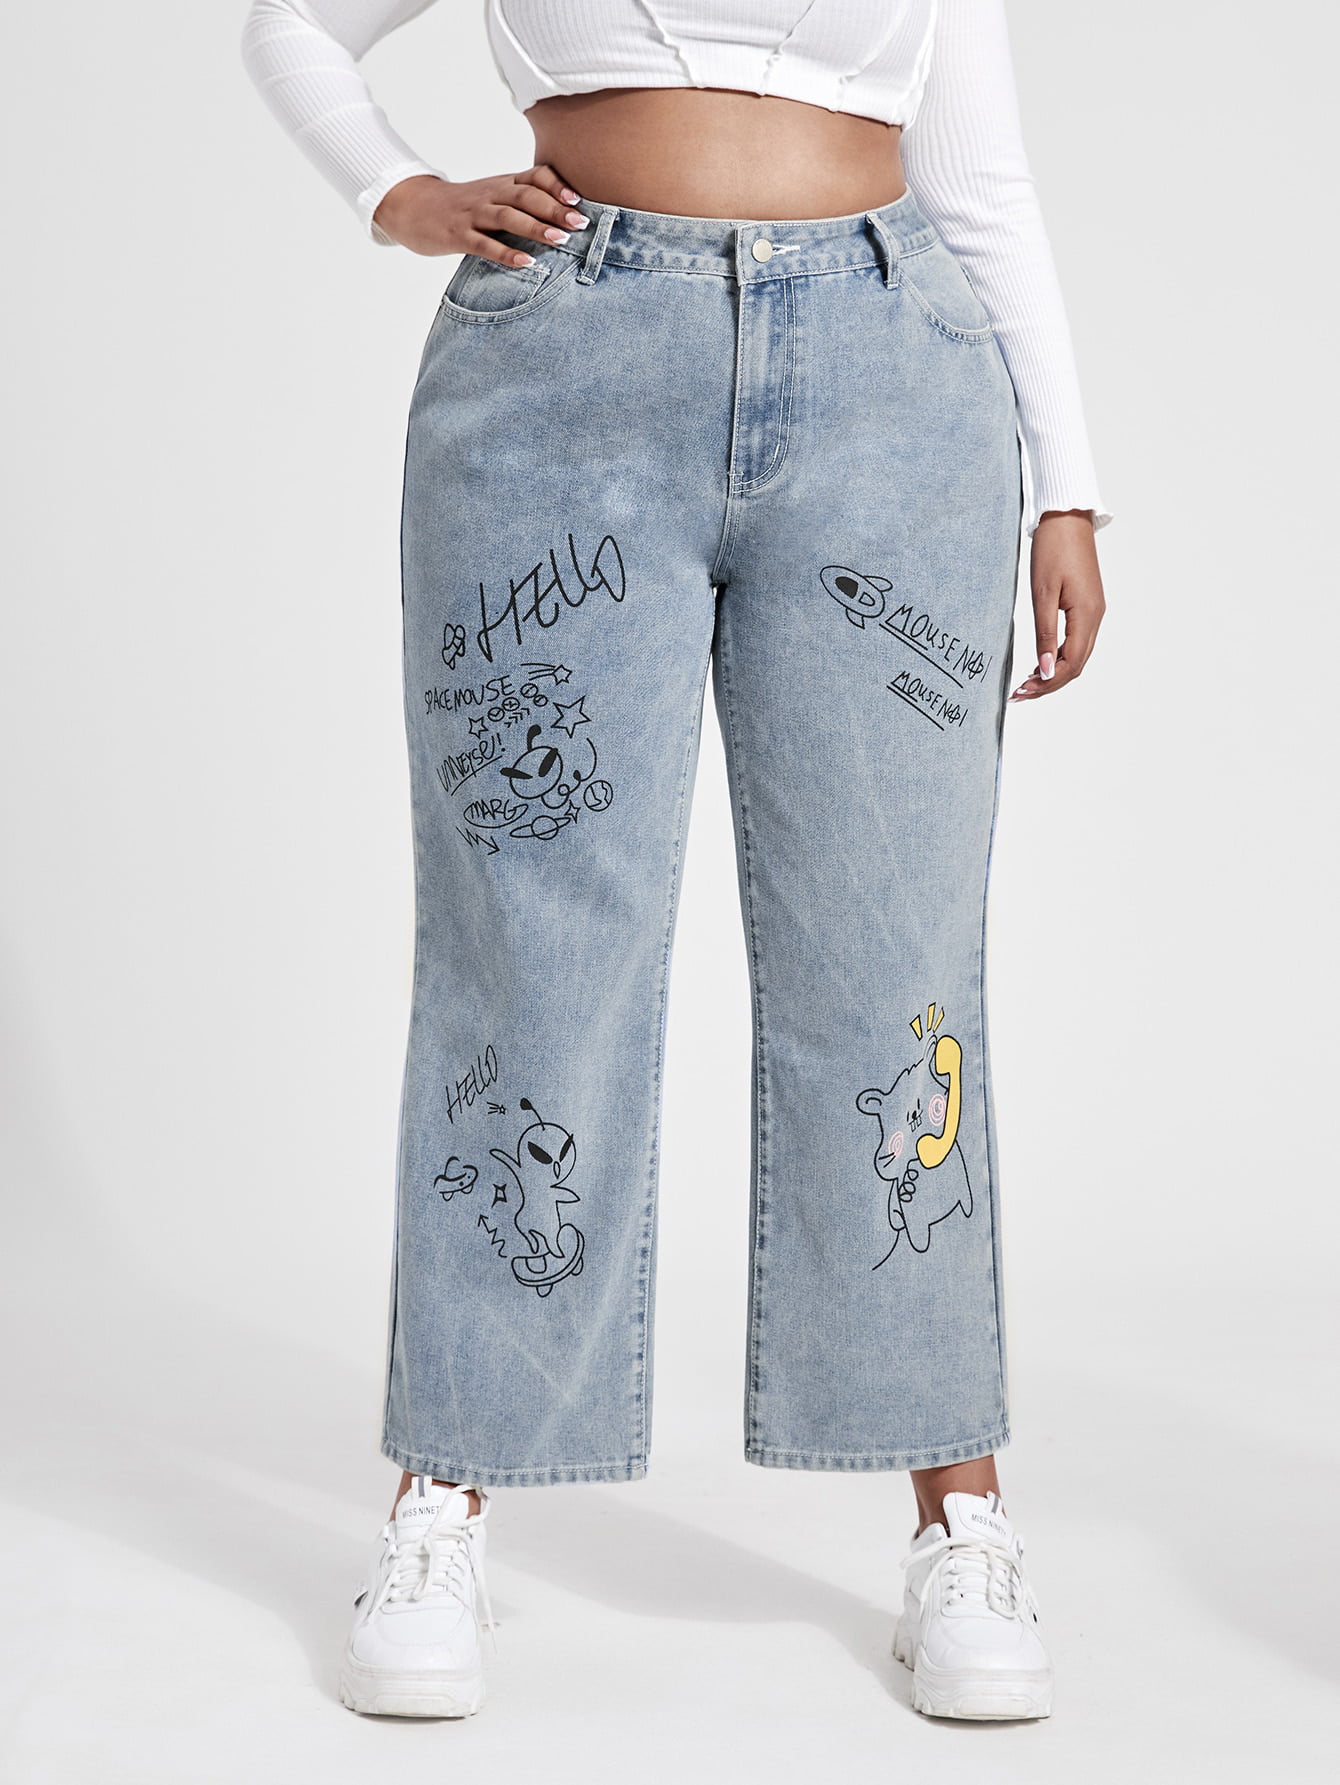 Women's Thicken Elastic High Waist Embroidery Cartoon Jeans Tapered Trousers